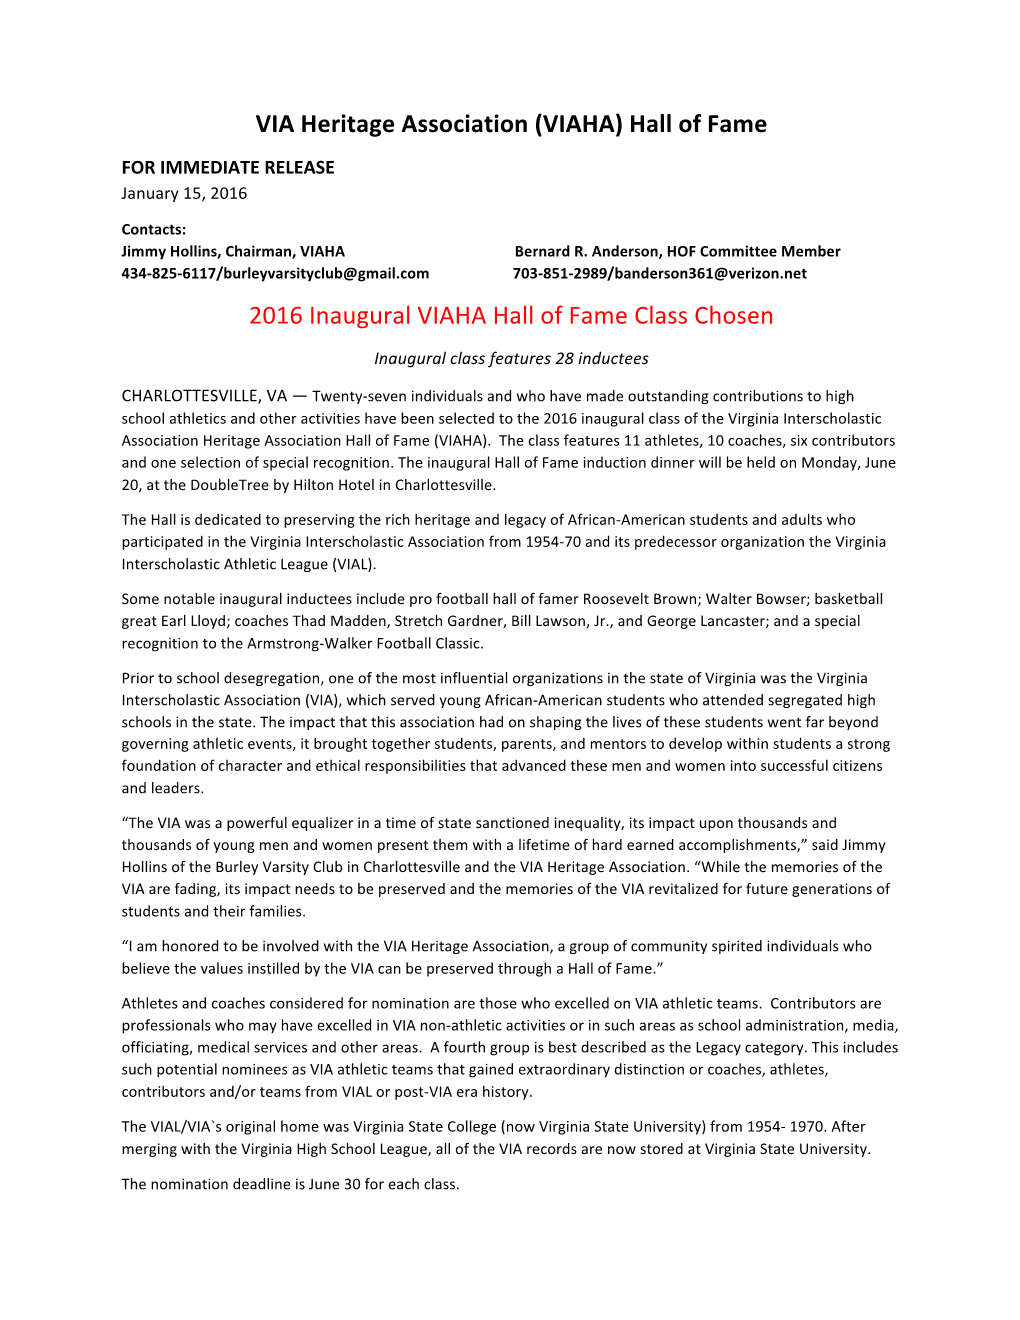 VIAHA) Hall of Fame for IMMEDIATE RELEASE January 15, 2016